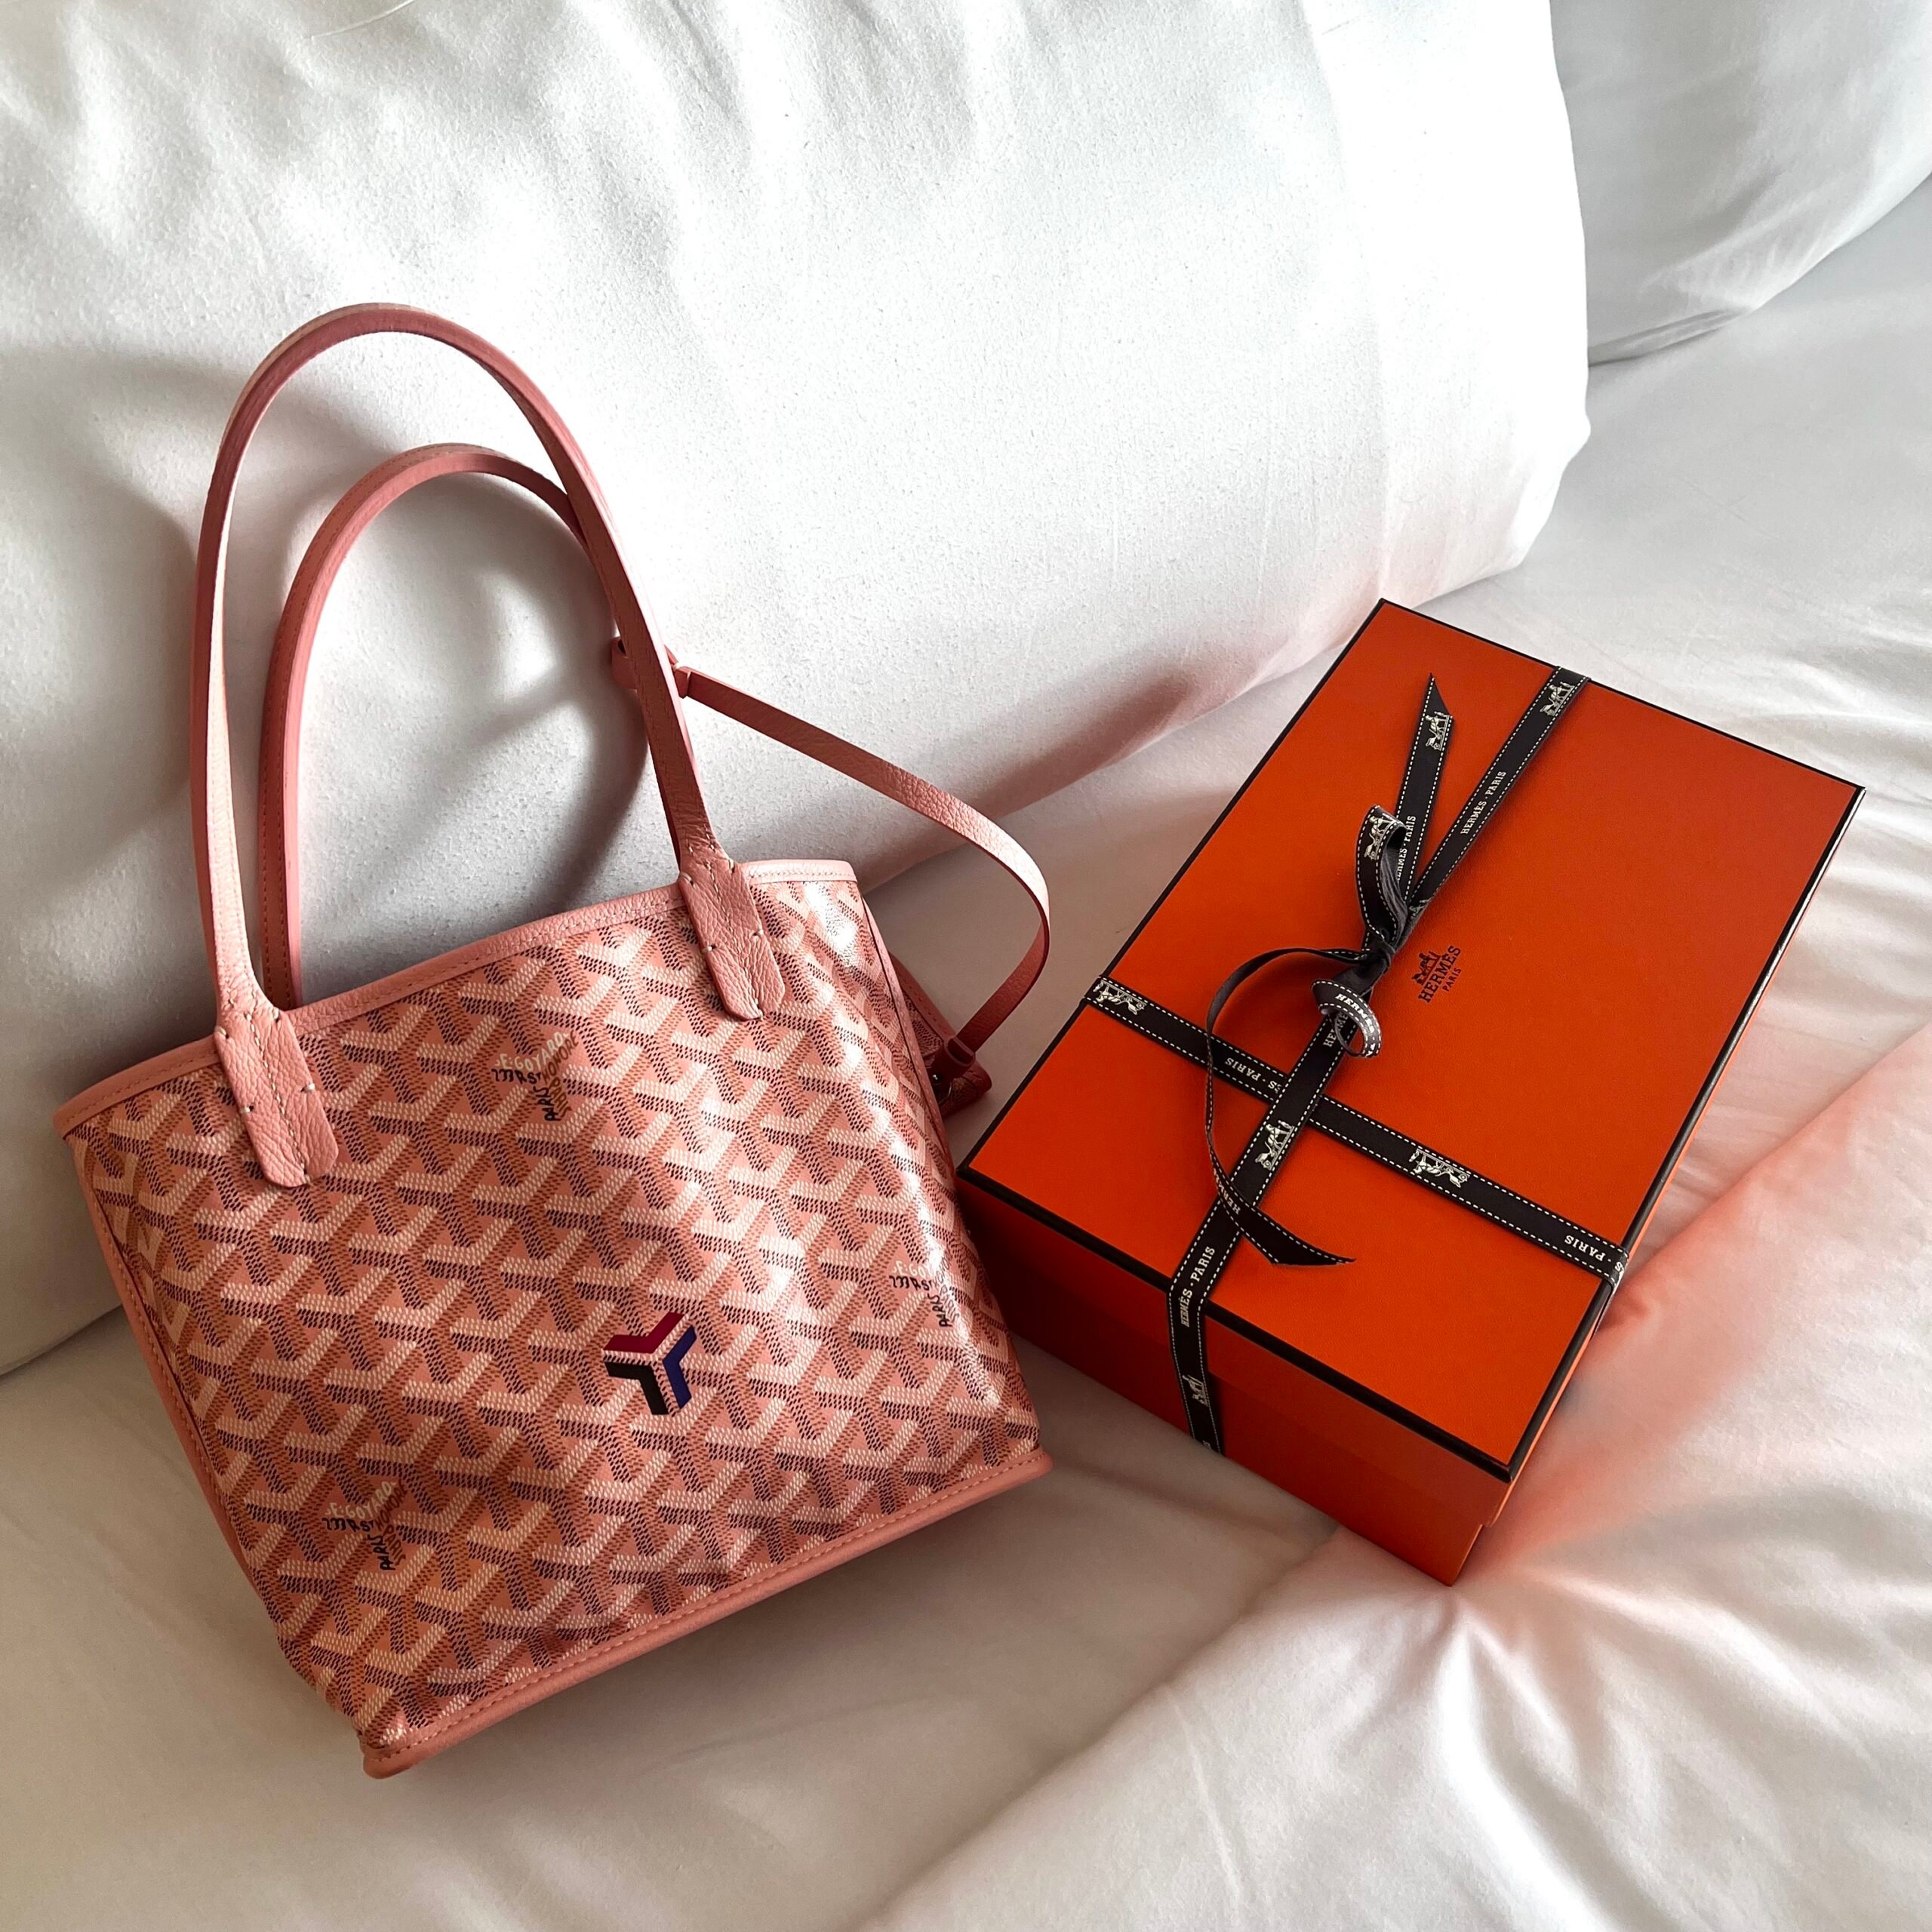 I finally added the Goyard Mini Anjou to my collection! My first